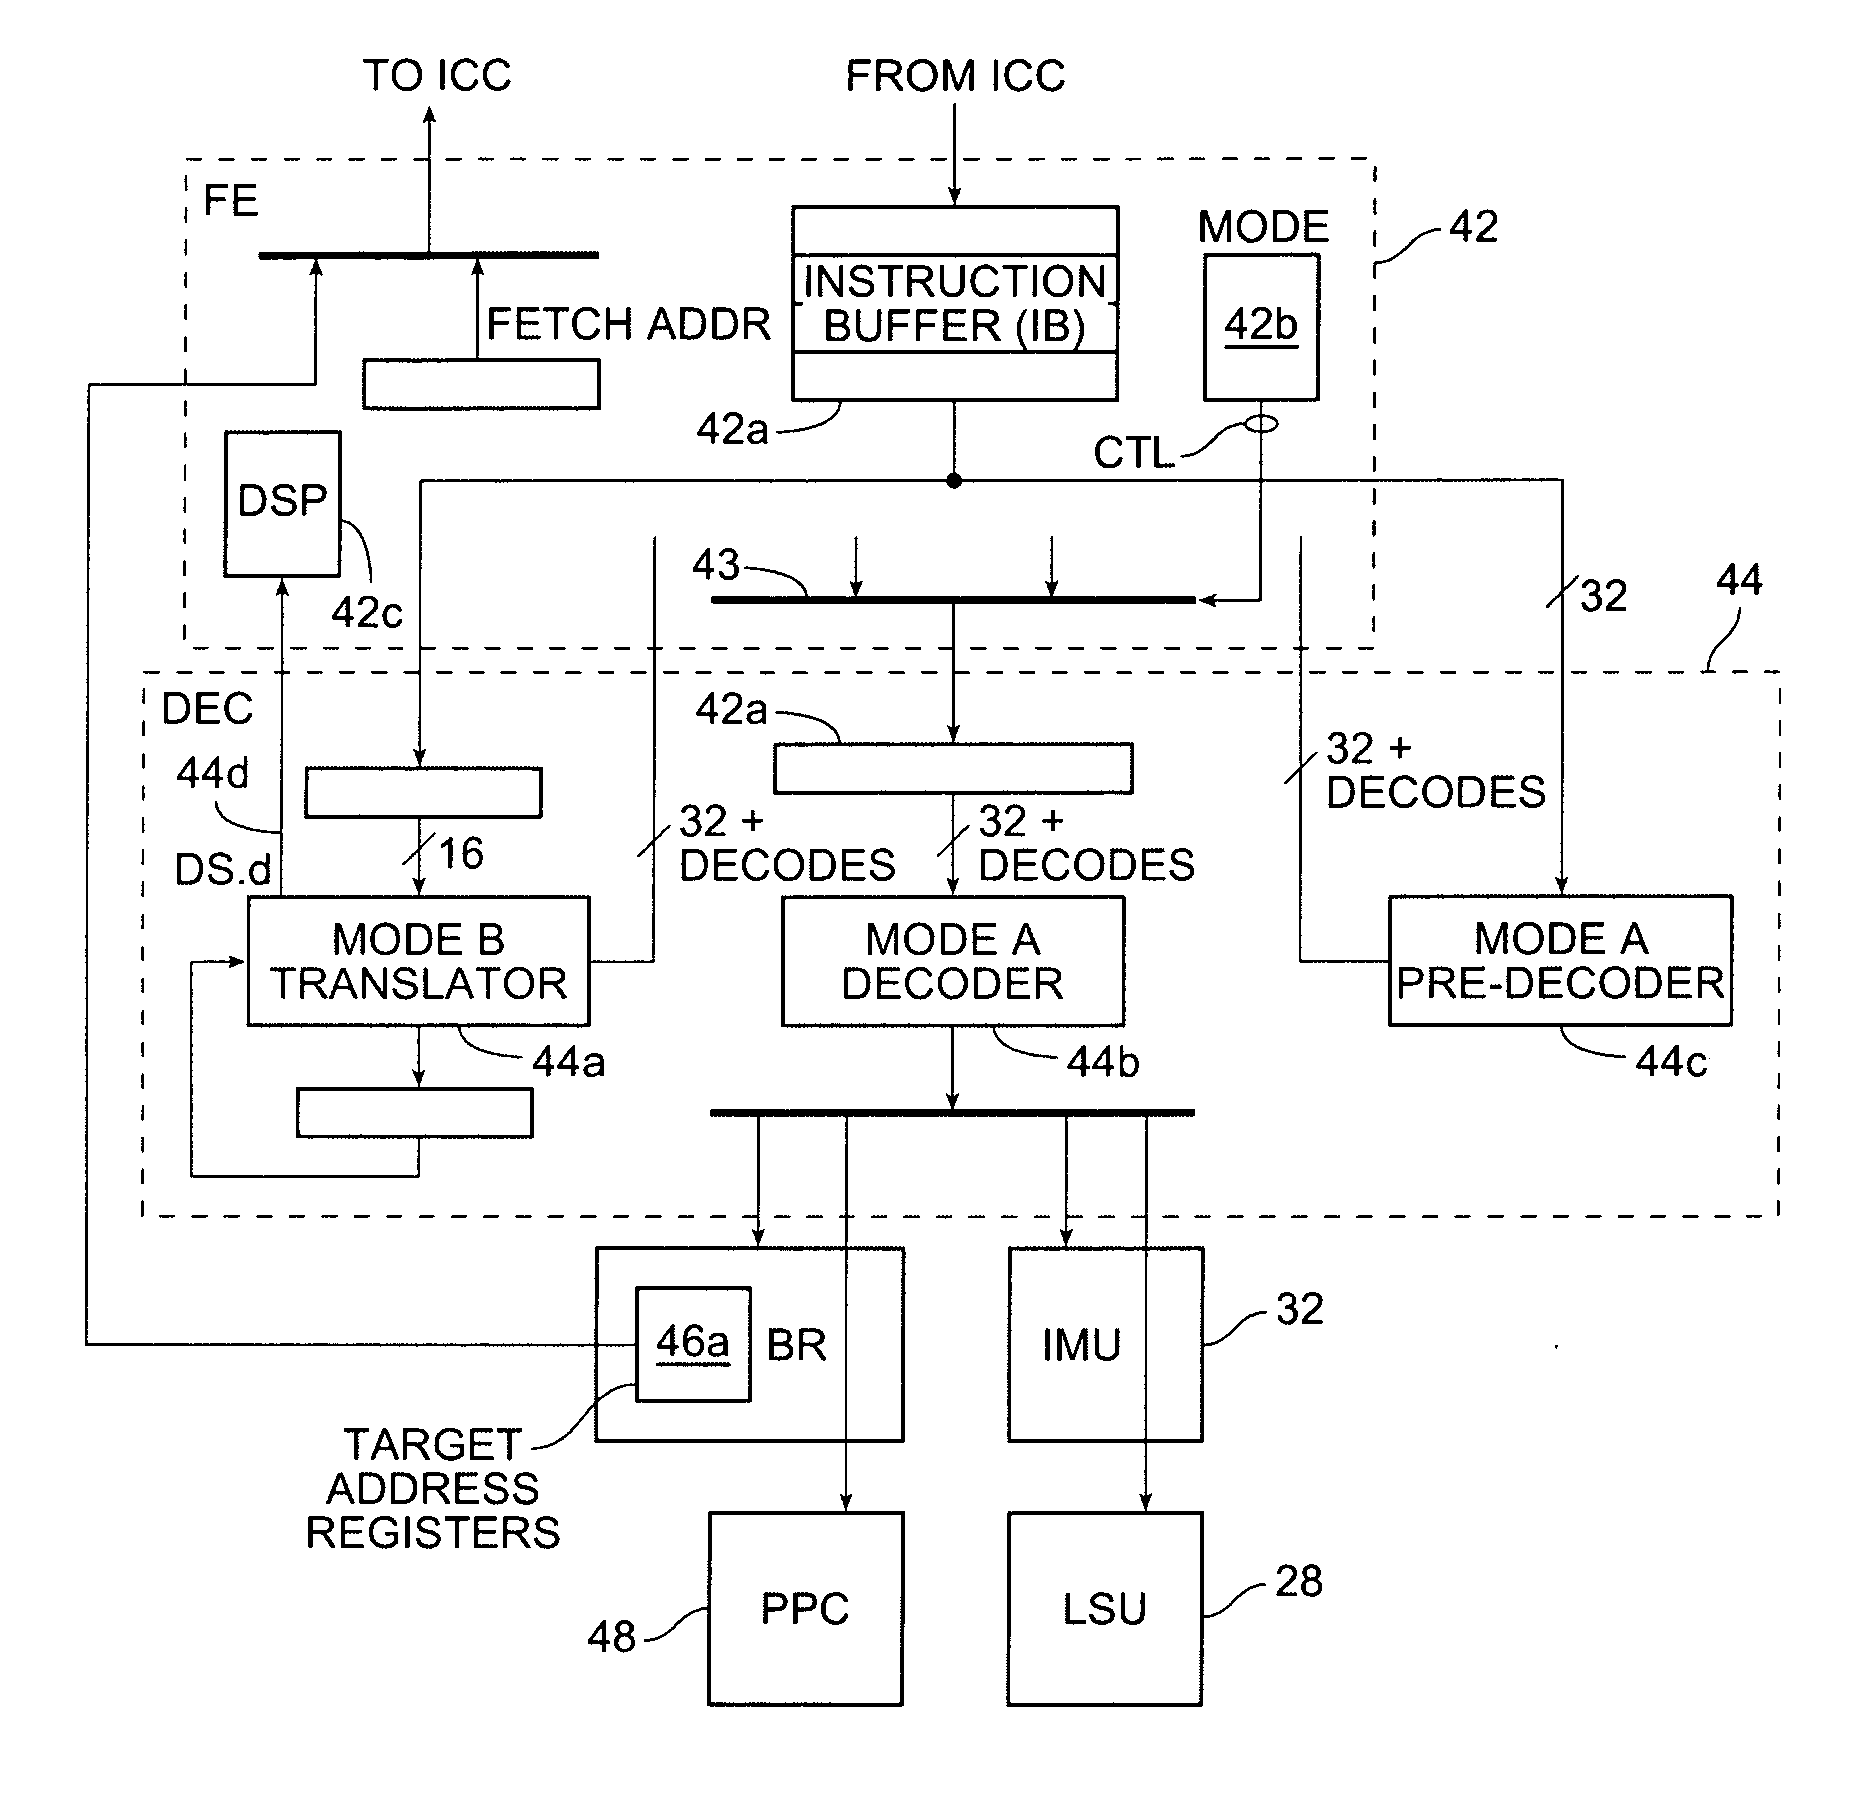 Processor architecture for executing two different fixed-length instruction sets